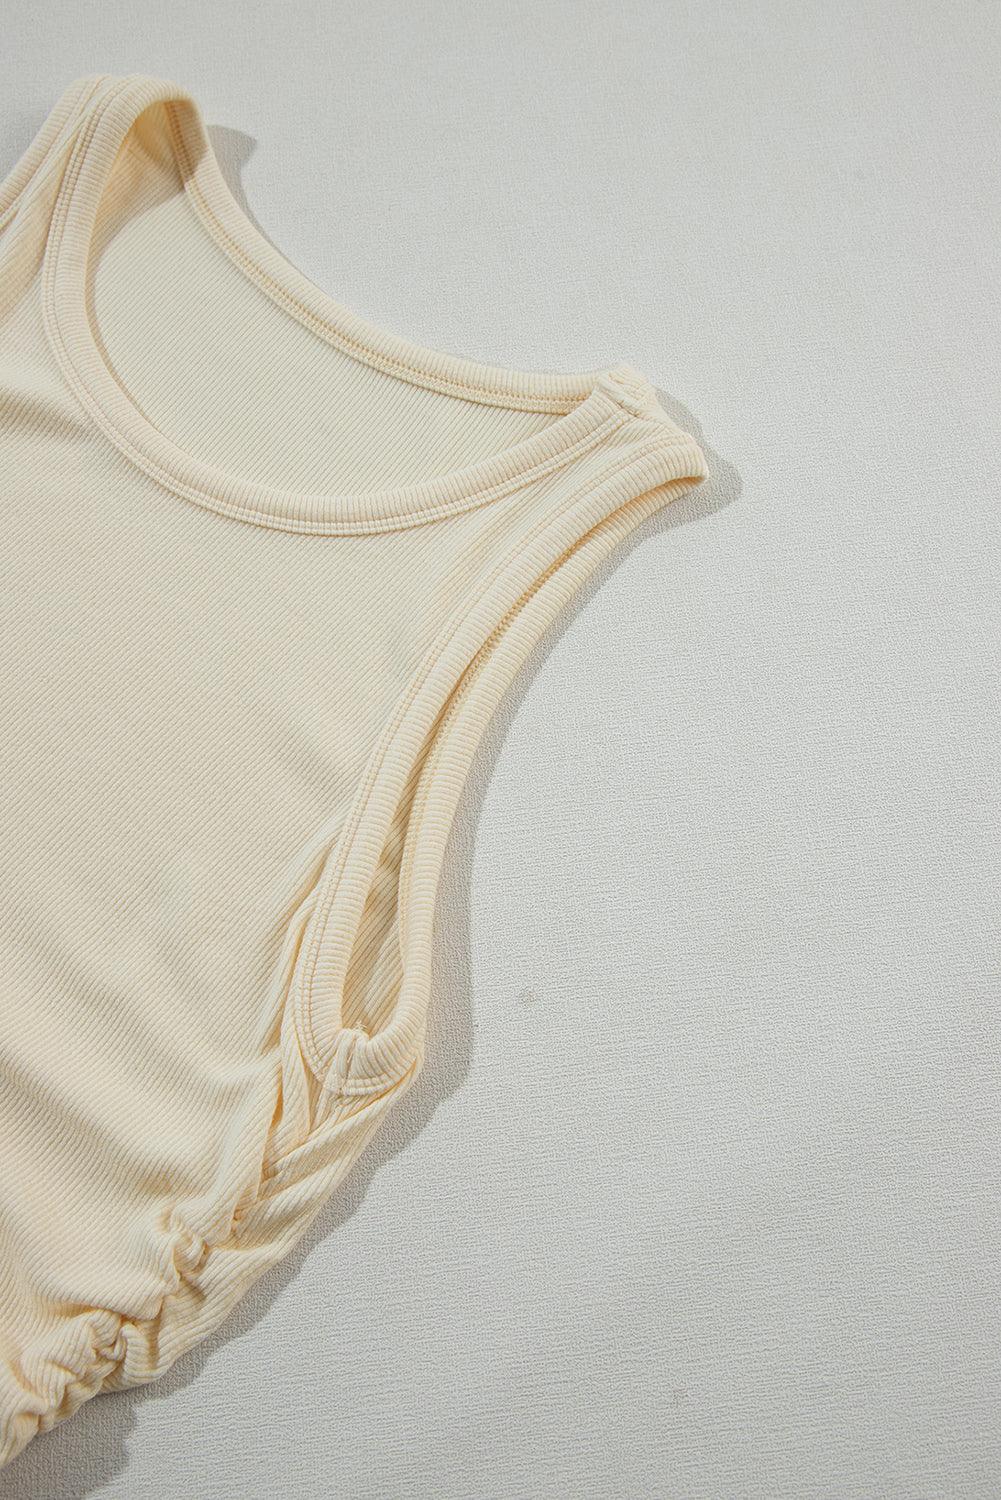 Apricot Creamy Plain Ruched Side Slim Summer Tank Top